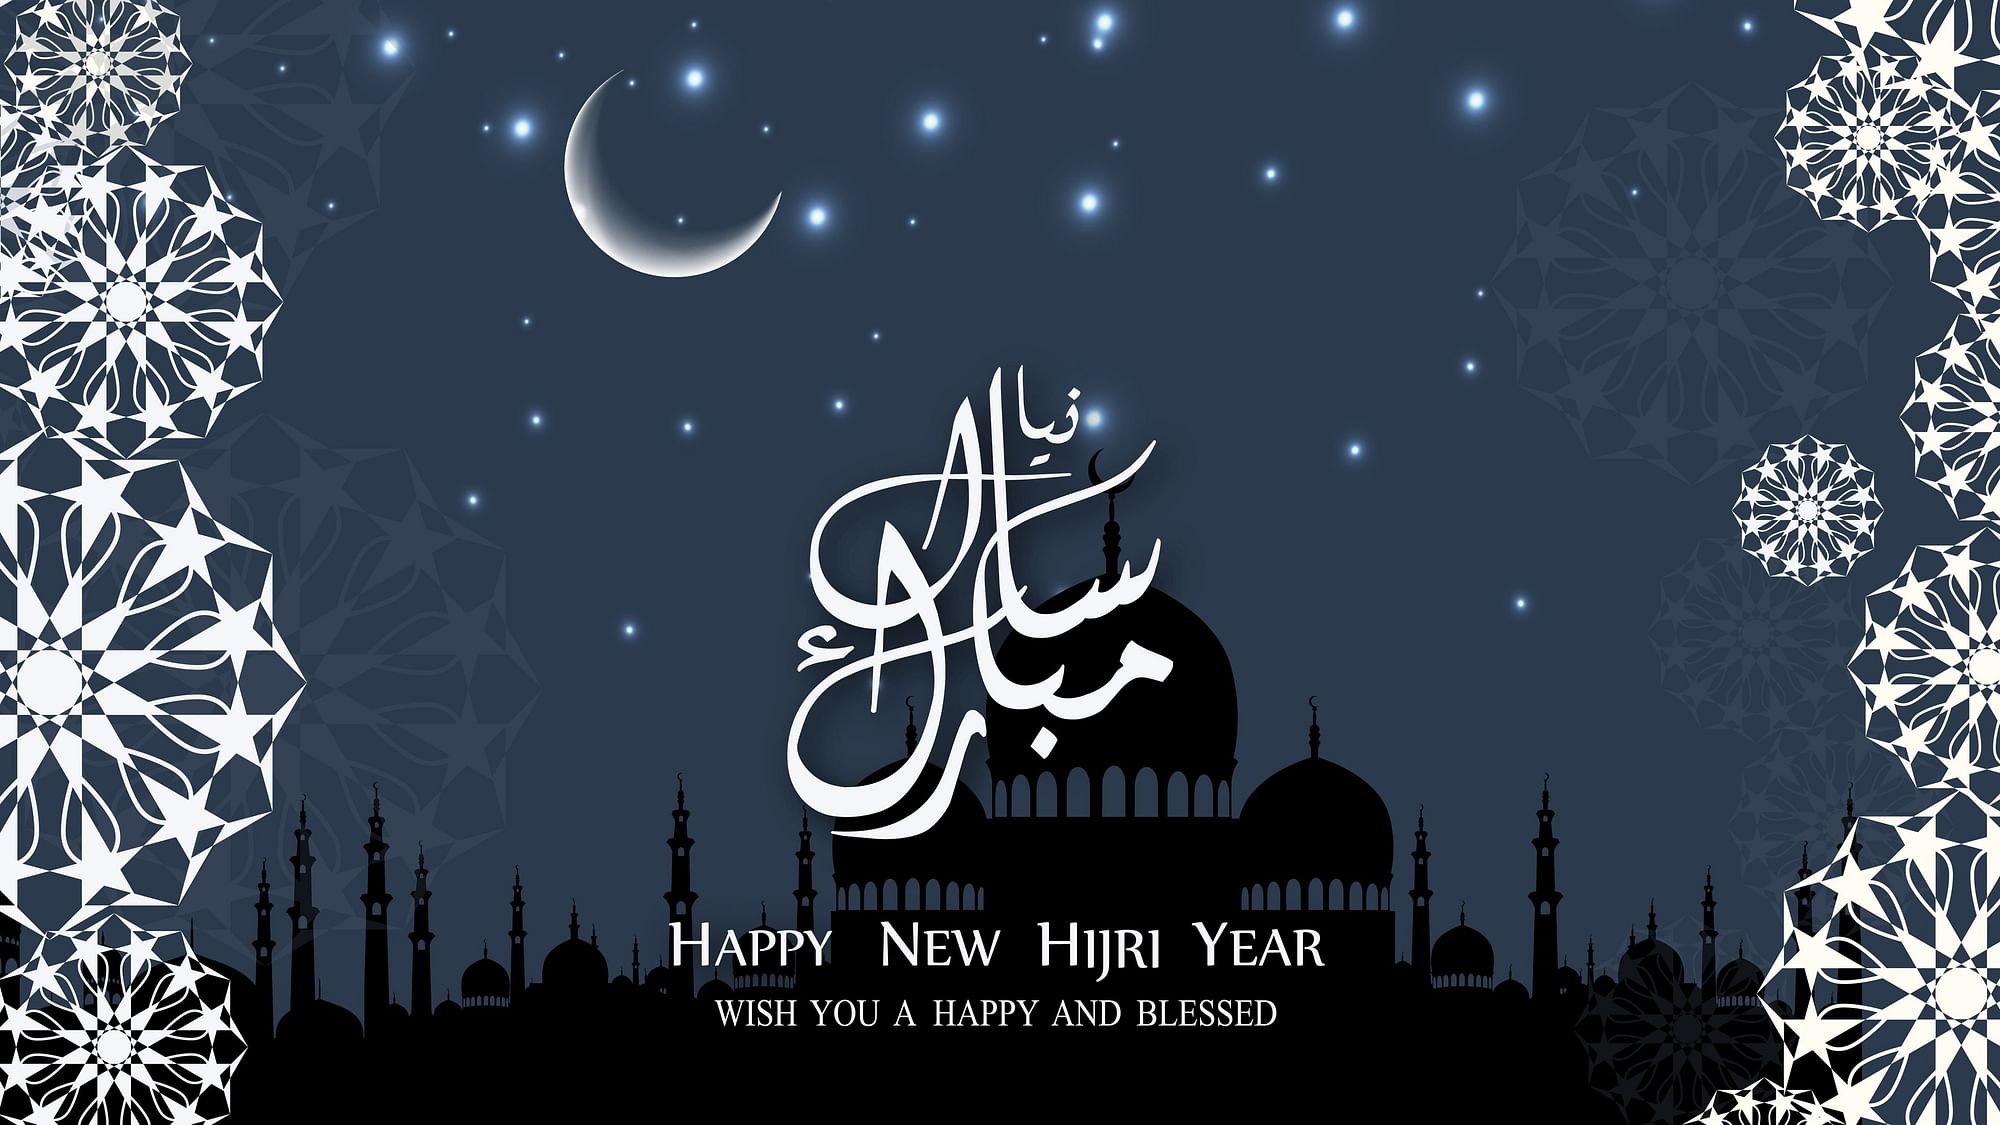  Happy Hijri Islamic New Year 1440 Greeting and Images with Quotes